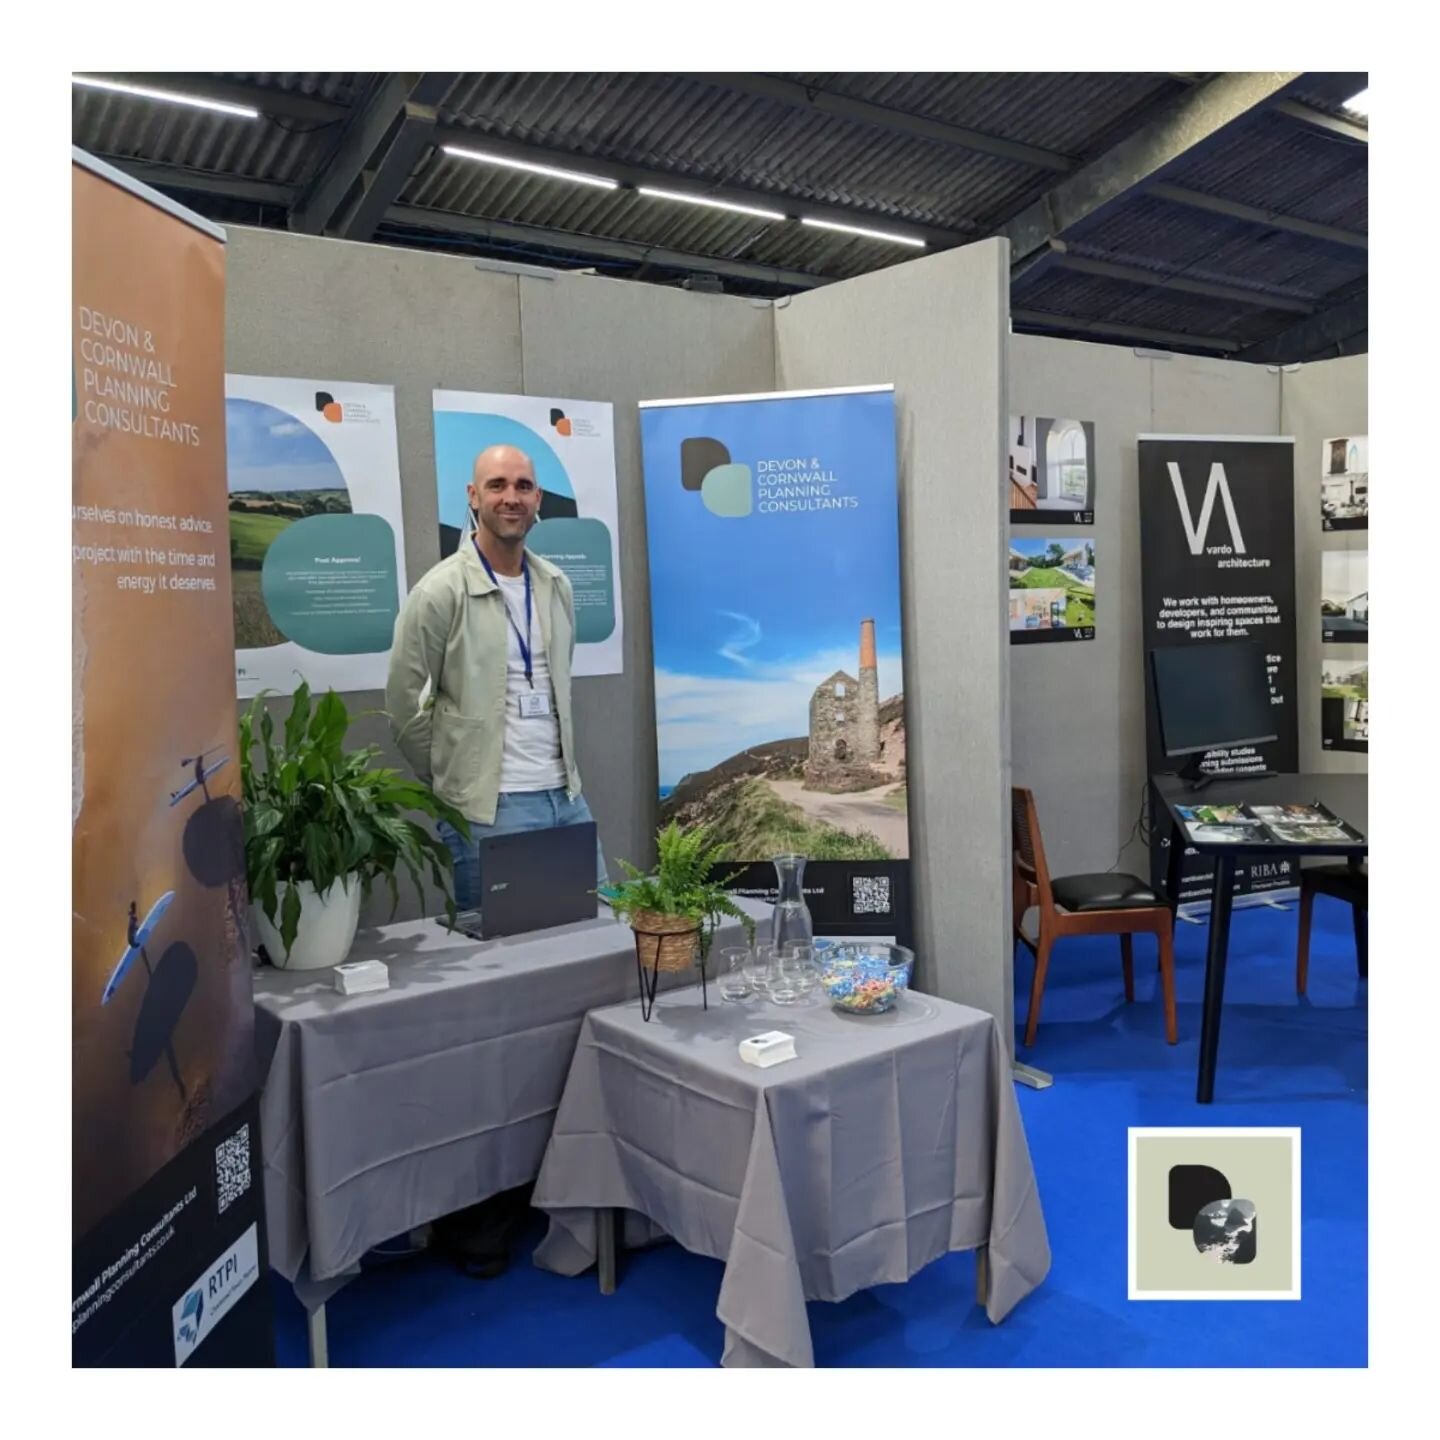 ⚪DAY ONE⚪

A few hours left of the first day of @cornwallselfbuildshow 

It's been great to meet so many new people and bump into some former clients as well

If you're heading down this afternoon or tomorrow come and say hello to us at Lot 25 right 